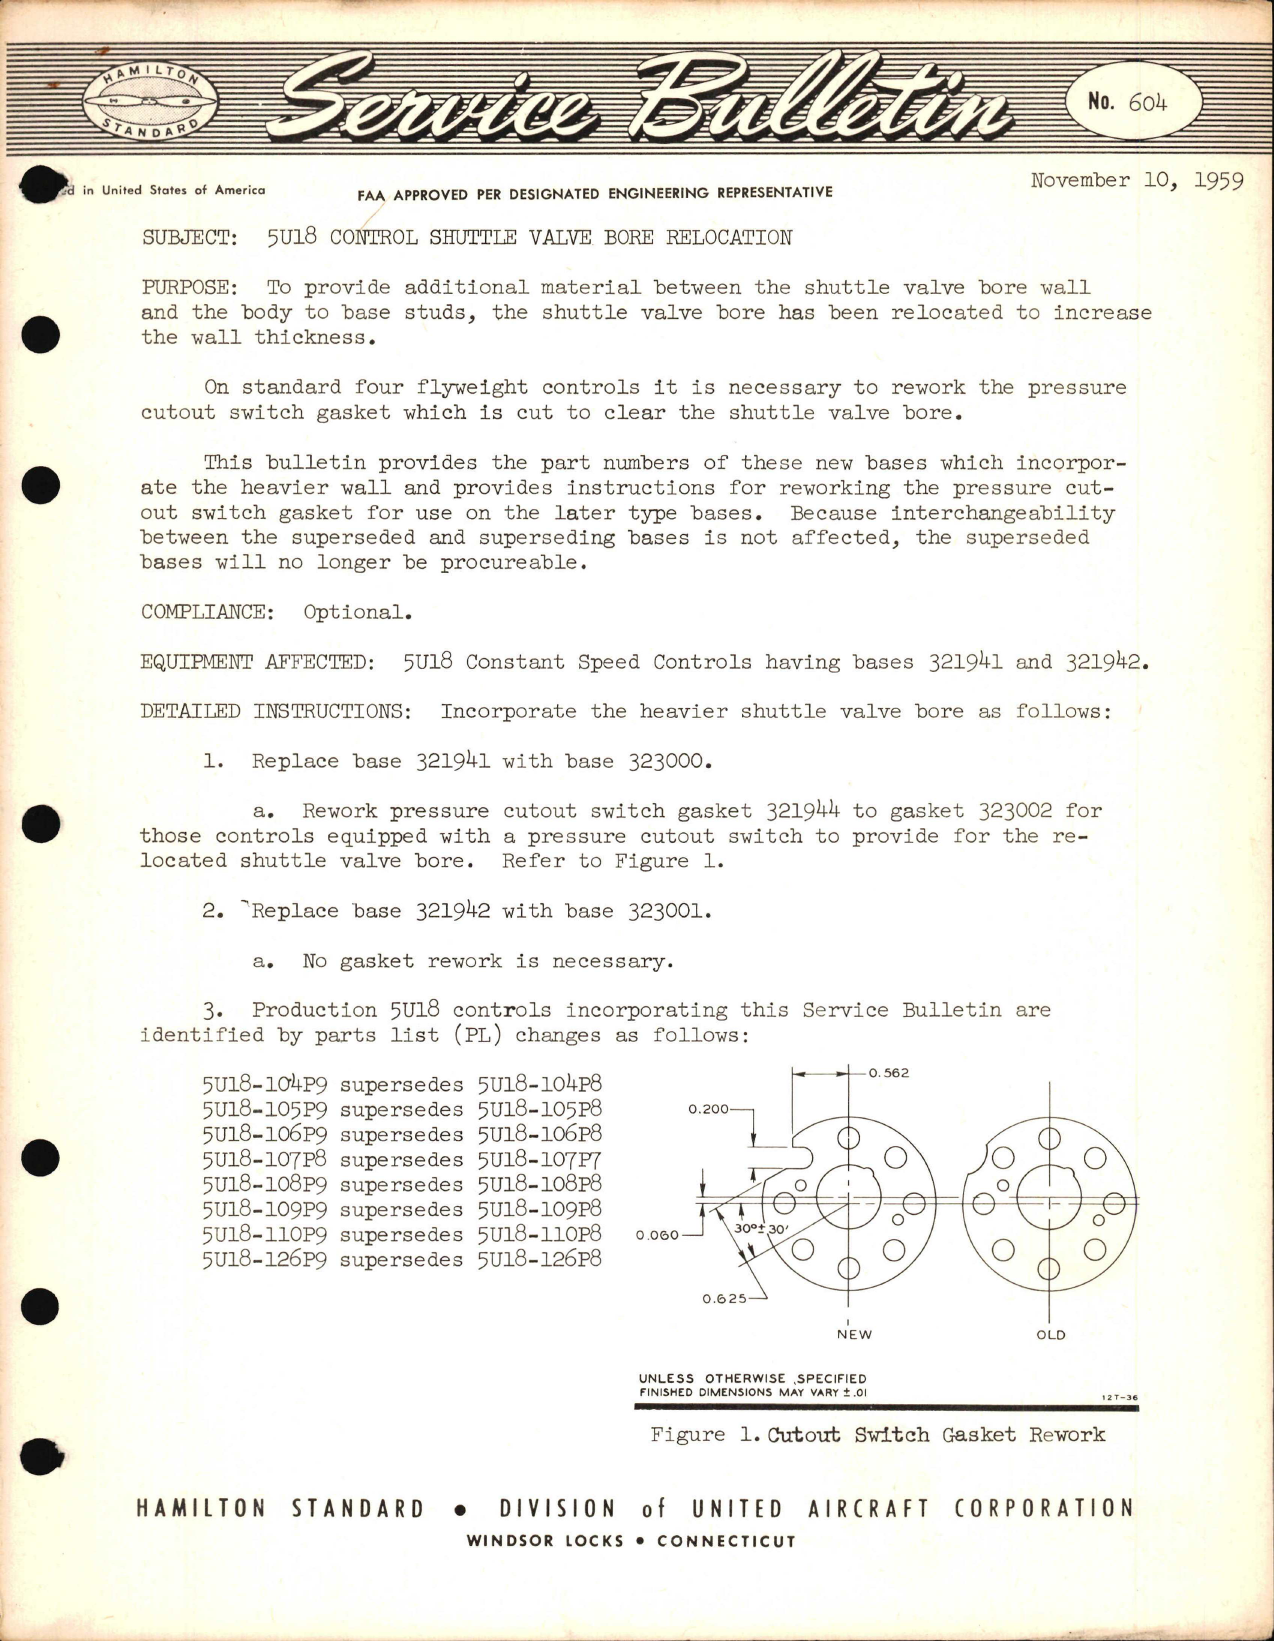 Sample page 1 from AirCorps Library document: 5U18 Control Shuttle Valve Bore Relocation